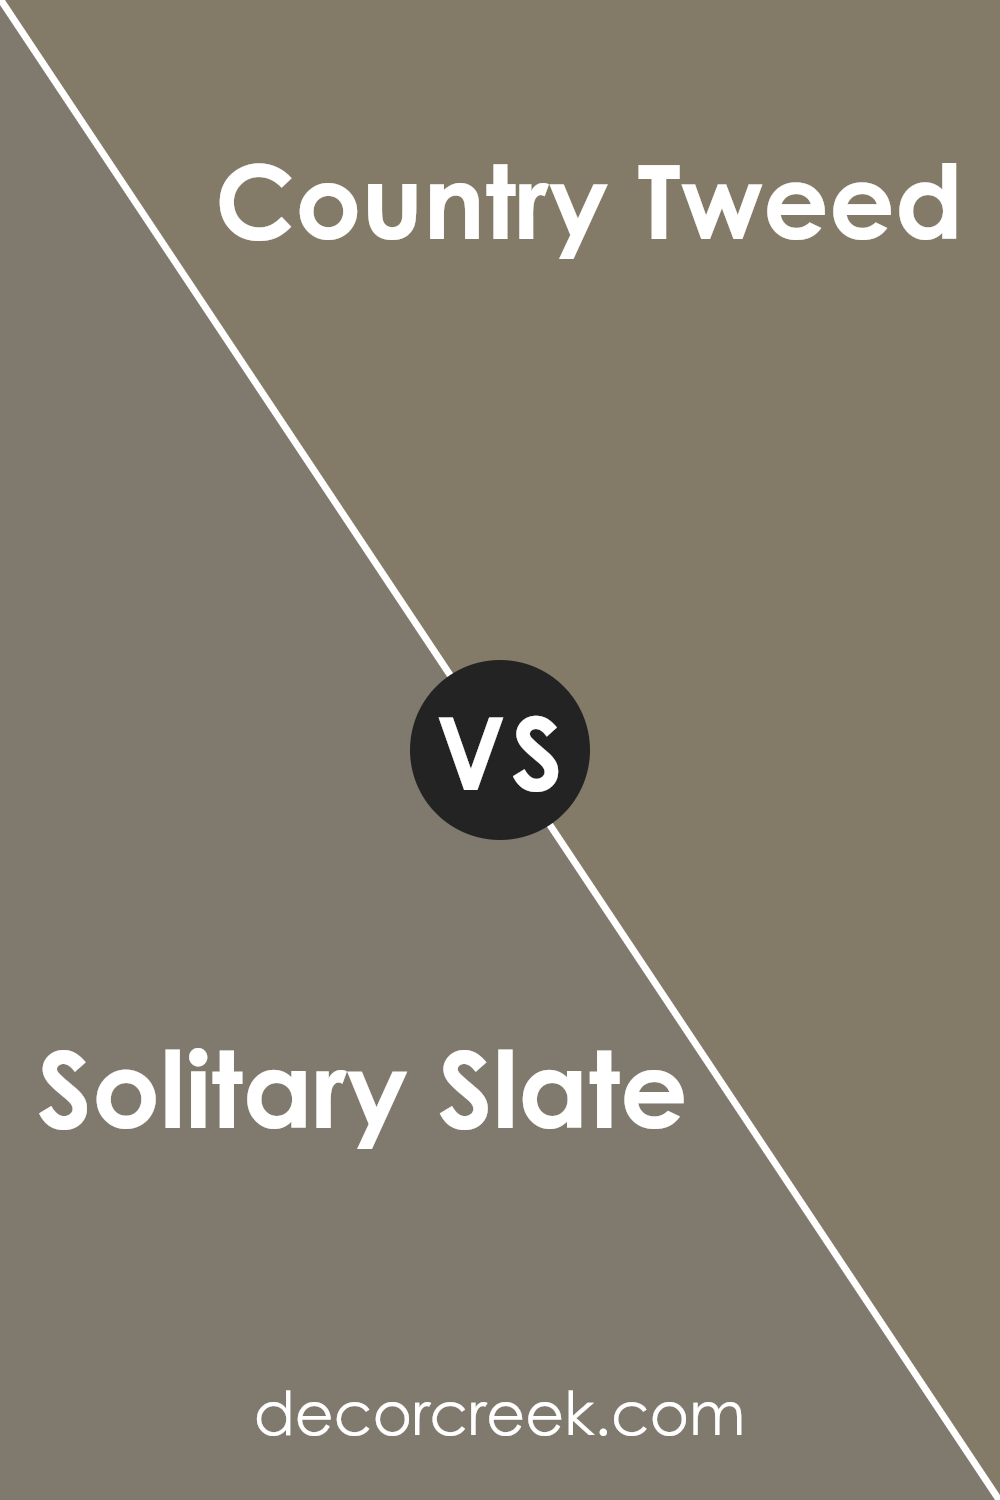 solitary_slate_sw_9598_vs_country_tweed_sw_9519